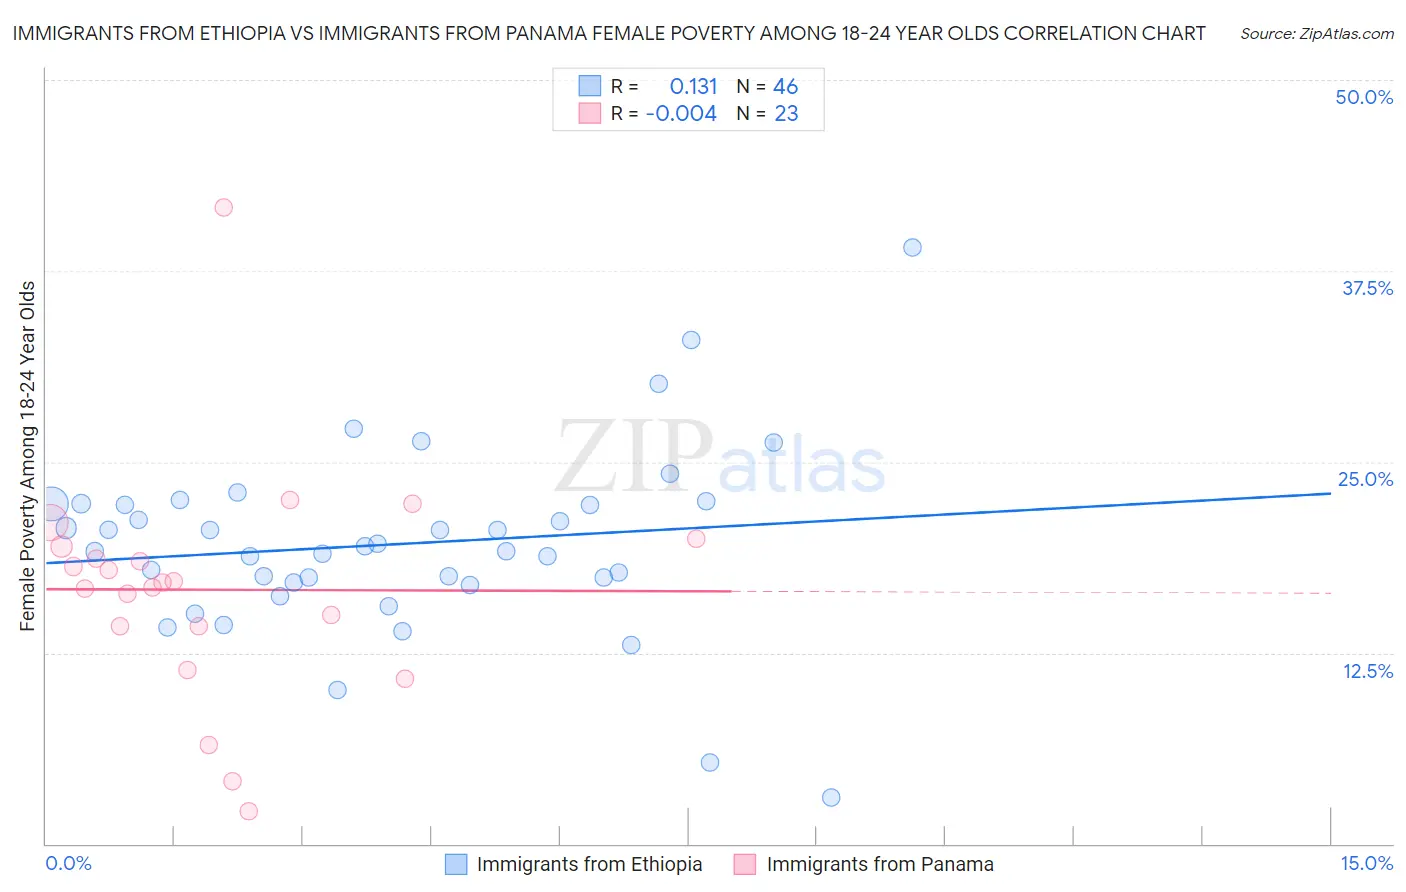 Immigrants from Ethiopia vs Immigrants from Panama Female Poverty Among 18-24 Year Olds